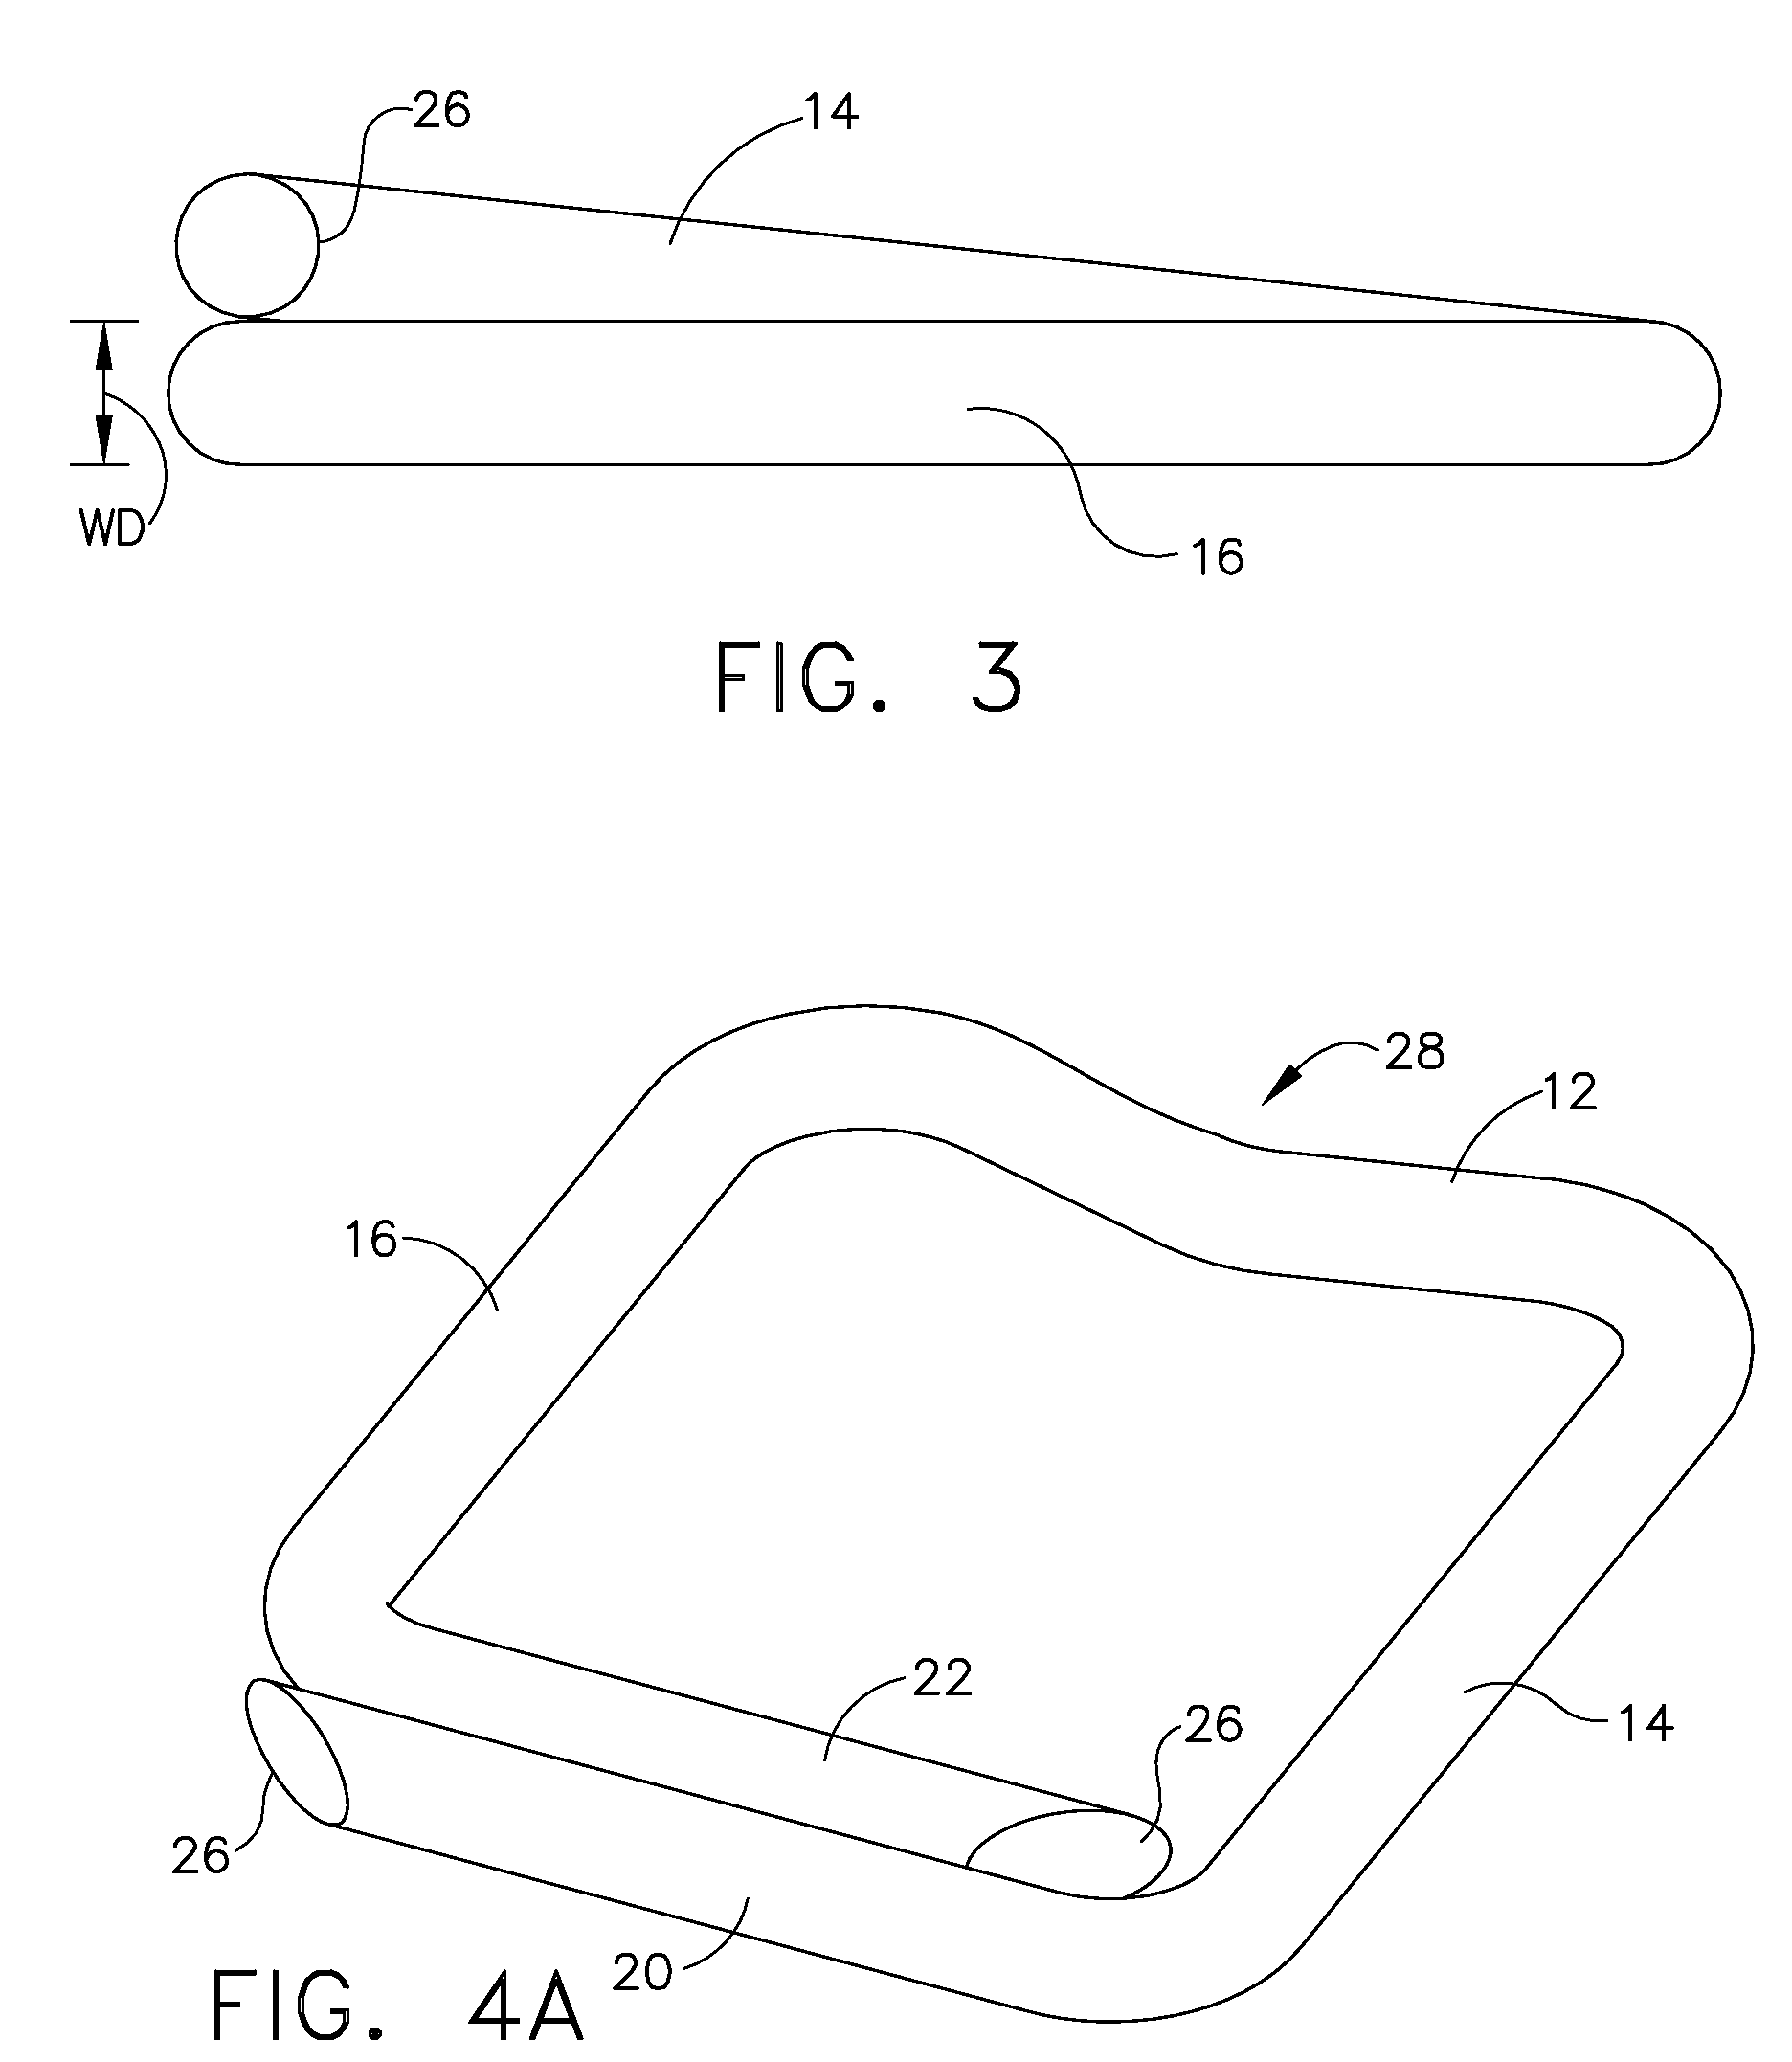 Surgical stapler for applying a large staple though a small delivery port and a method of using the stapler to secure a tissue fold